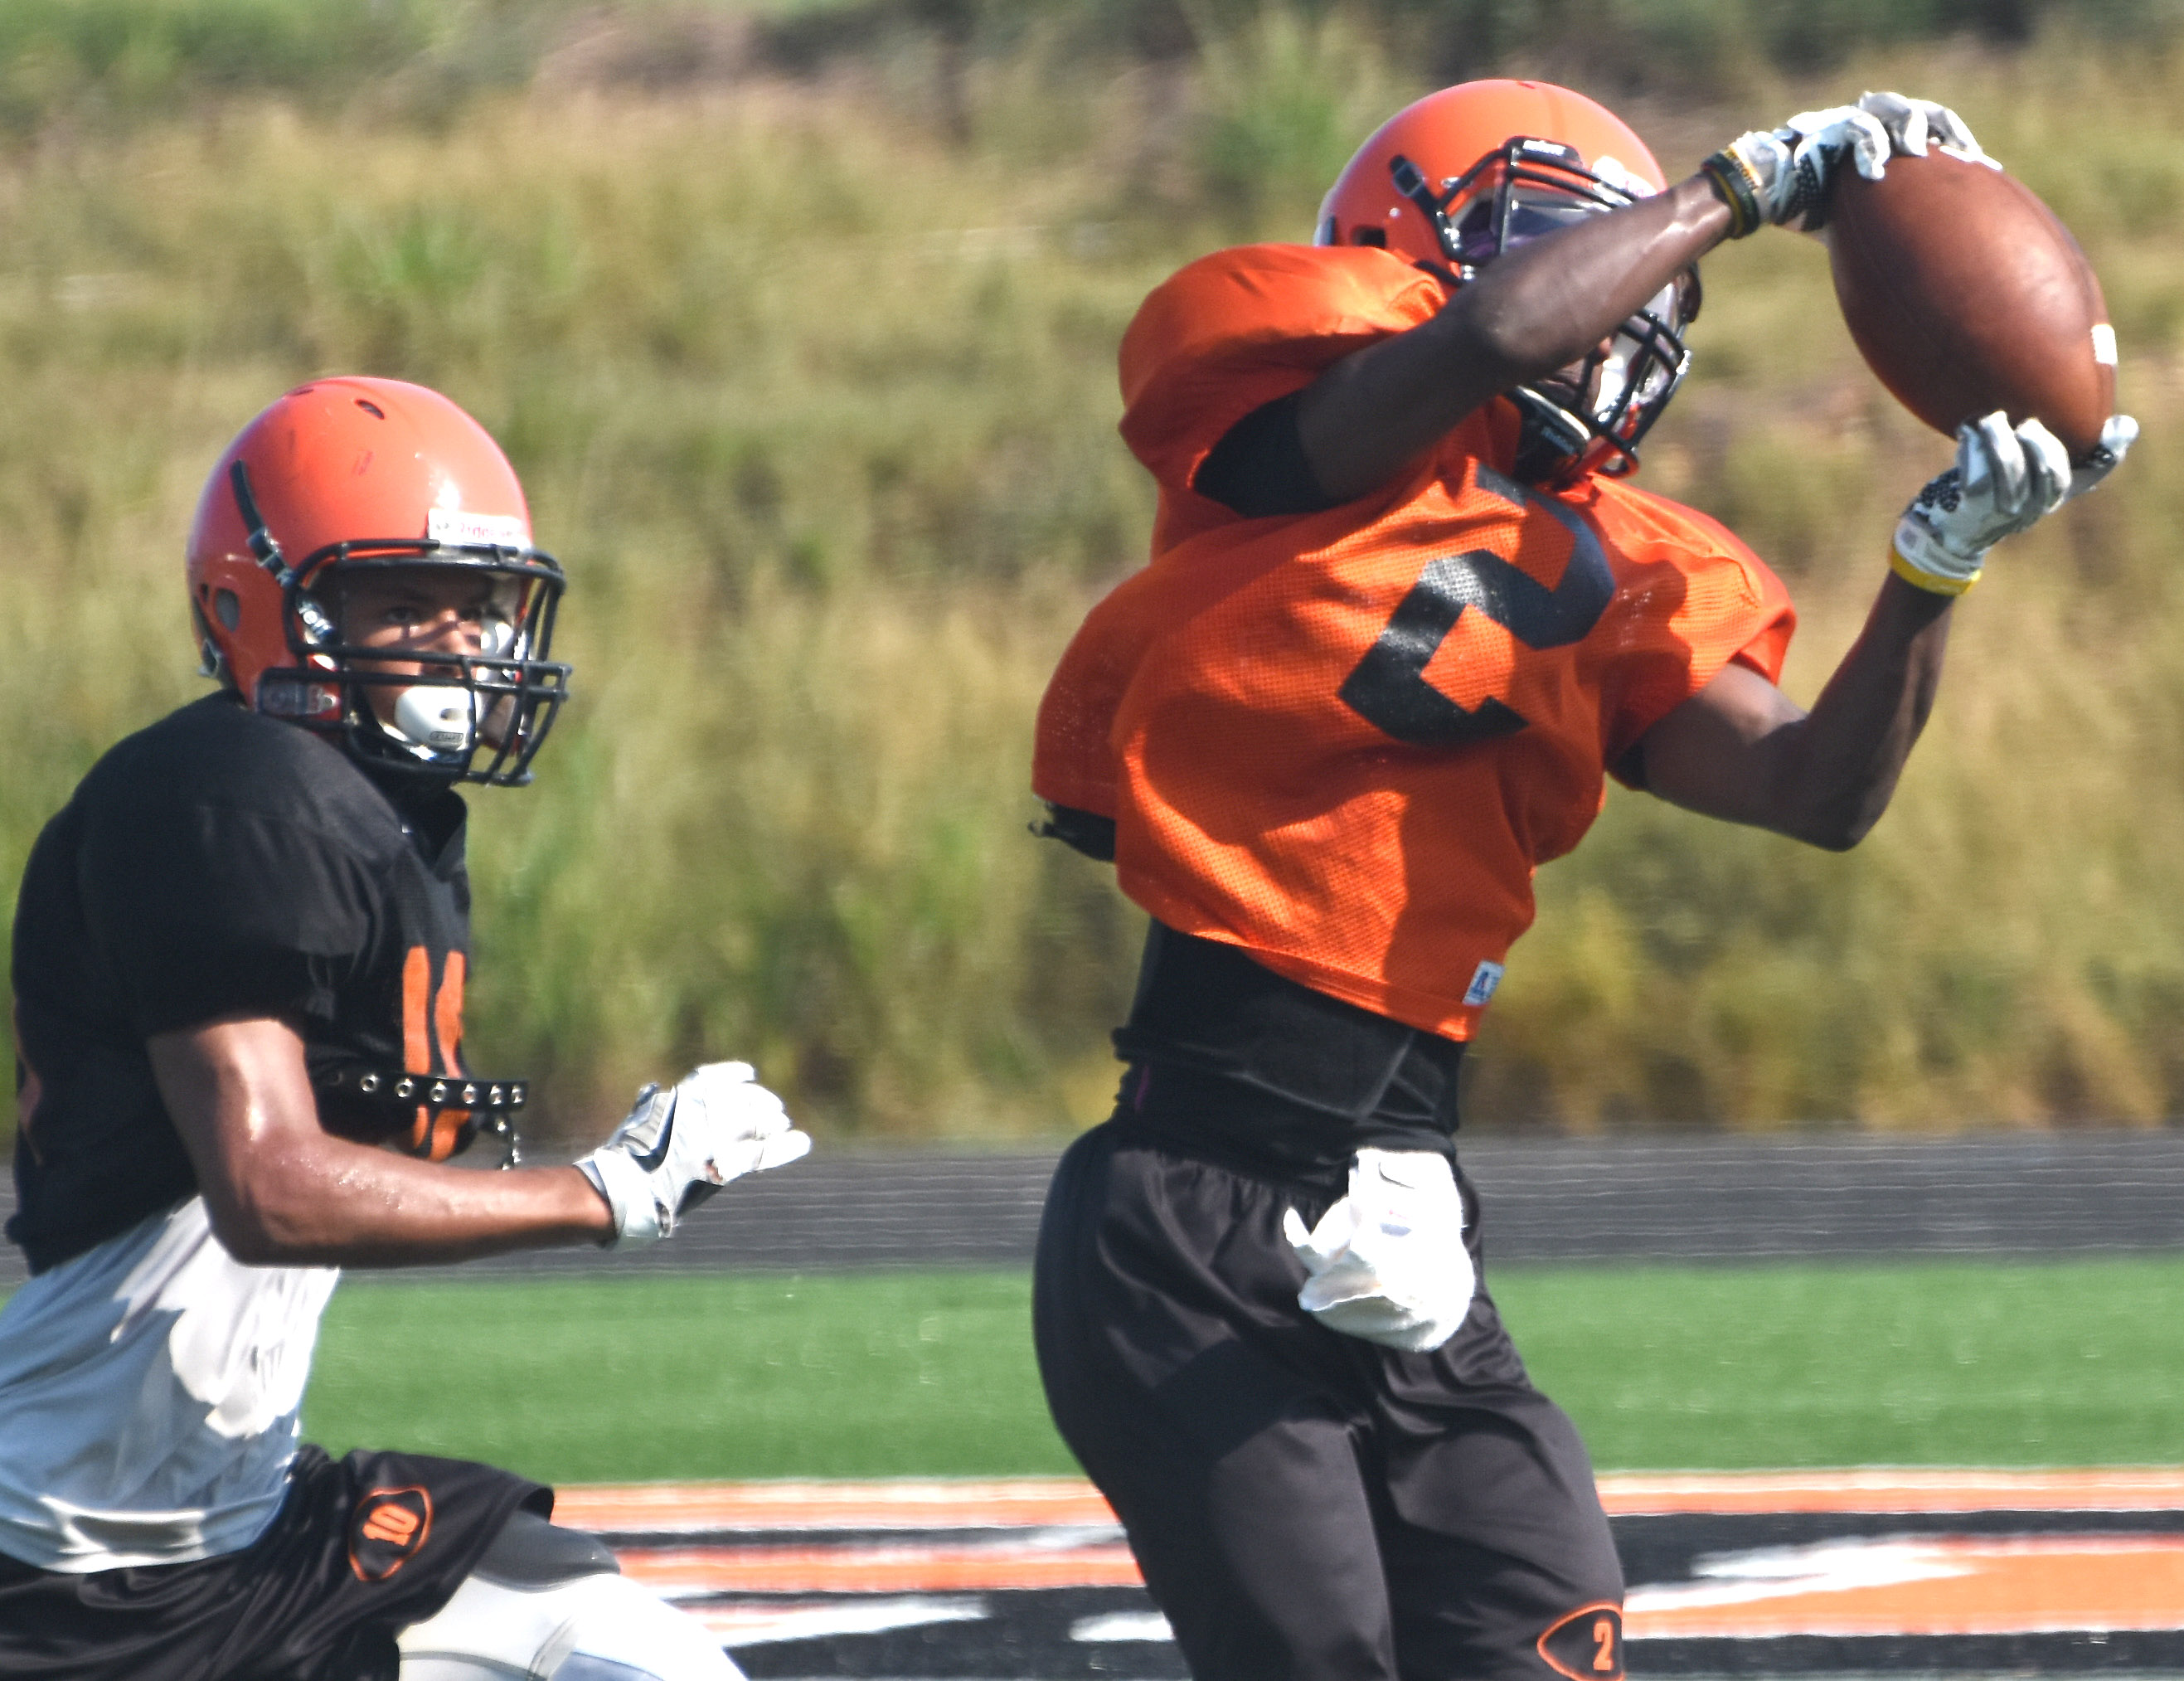 TK Hopkins makes the catch during the Scrapper scrimmage Friday morning.